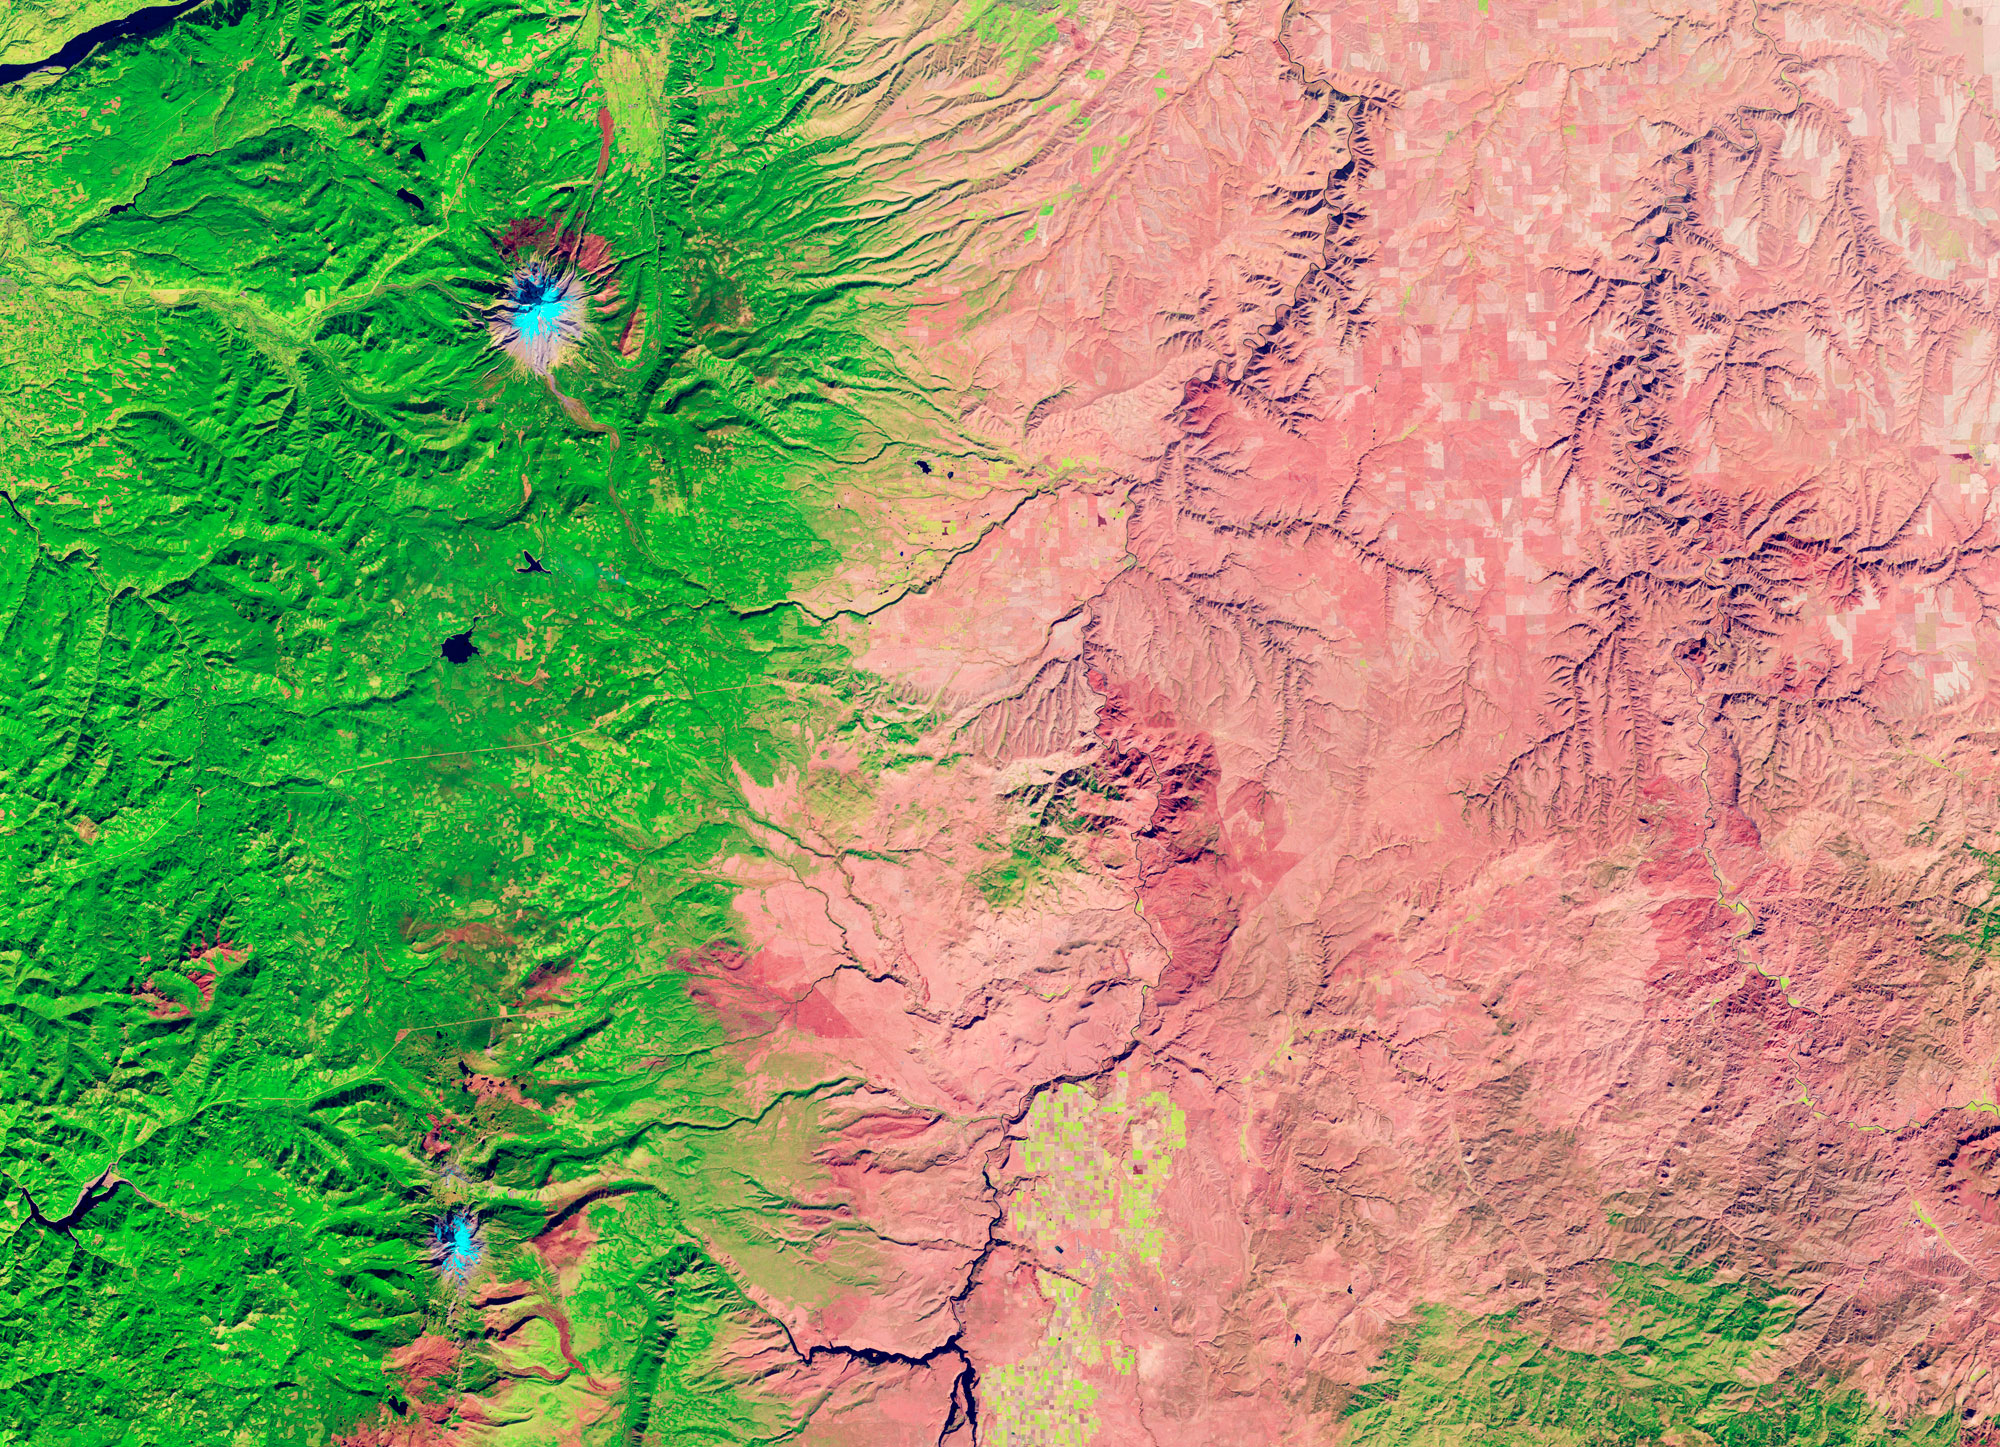 False-color satellite photo showing the dramatic difference in vegetation cover caused by differences in precipitation in western and eastern Oregon. Western Oregon is bright green, whereas most of eastern Oregon is tan. Two high volcanic peaks of the Cascades appear blue.